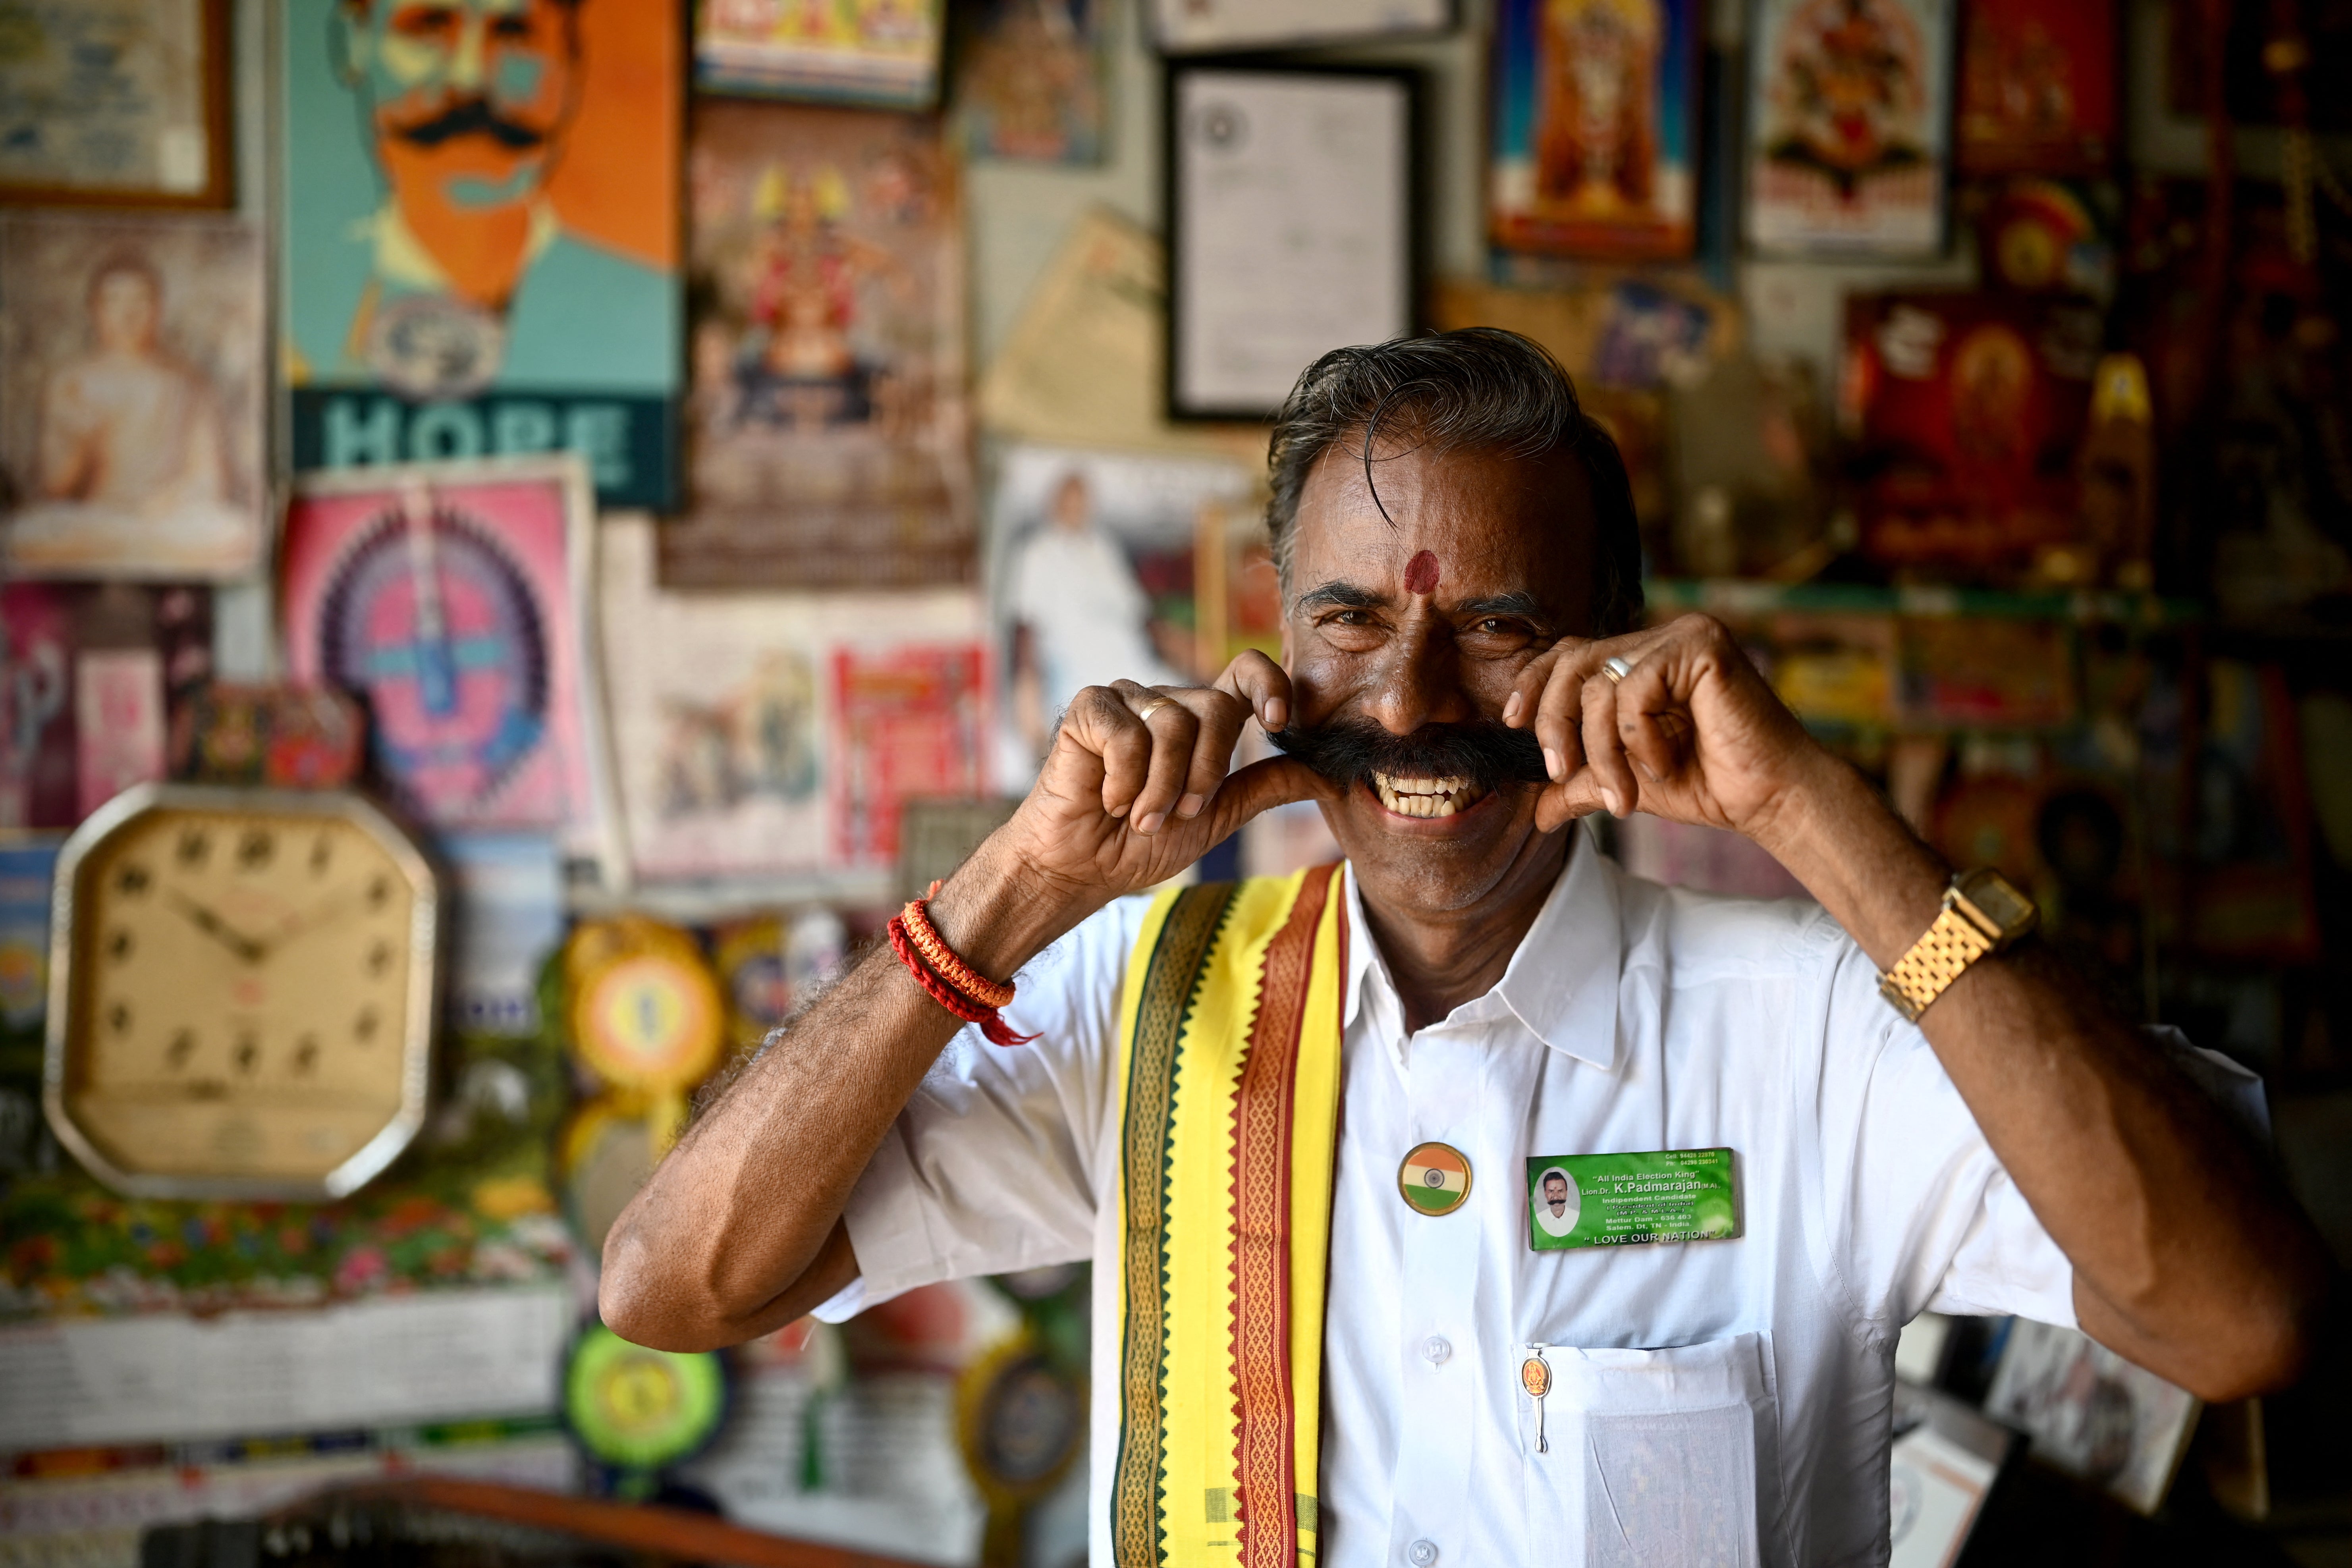 K Padmarajan twirls his moustache while posing for a photograph at his office in Mettur, near Salem district in India’s Tamil Nadu state